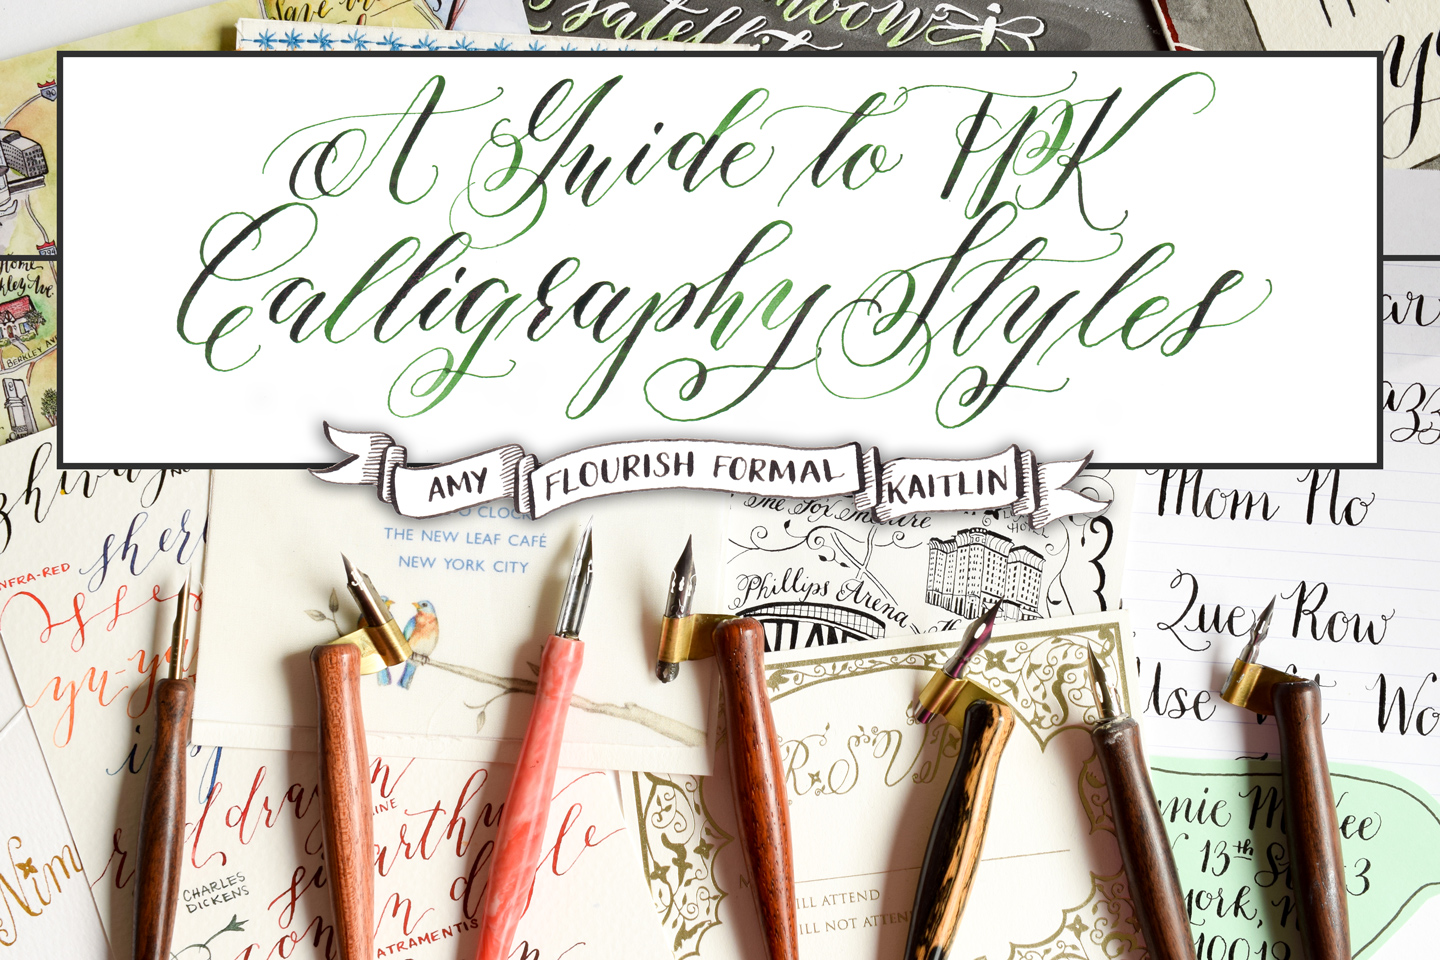 A Guide to TPK Calligraphy Styles: Amy, Flourish Formal, Kaitlin